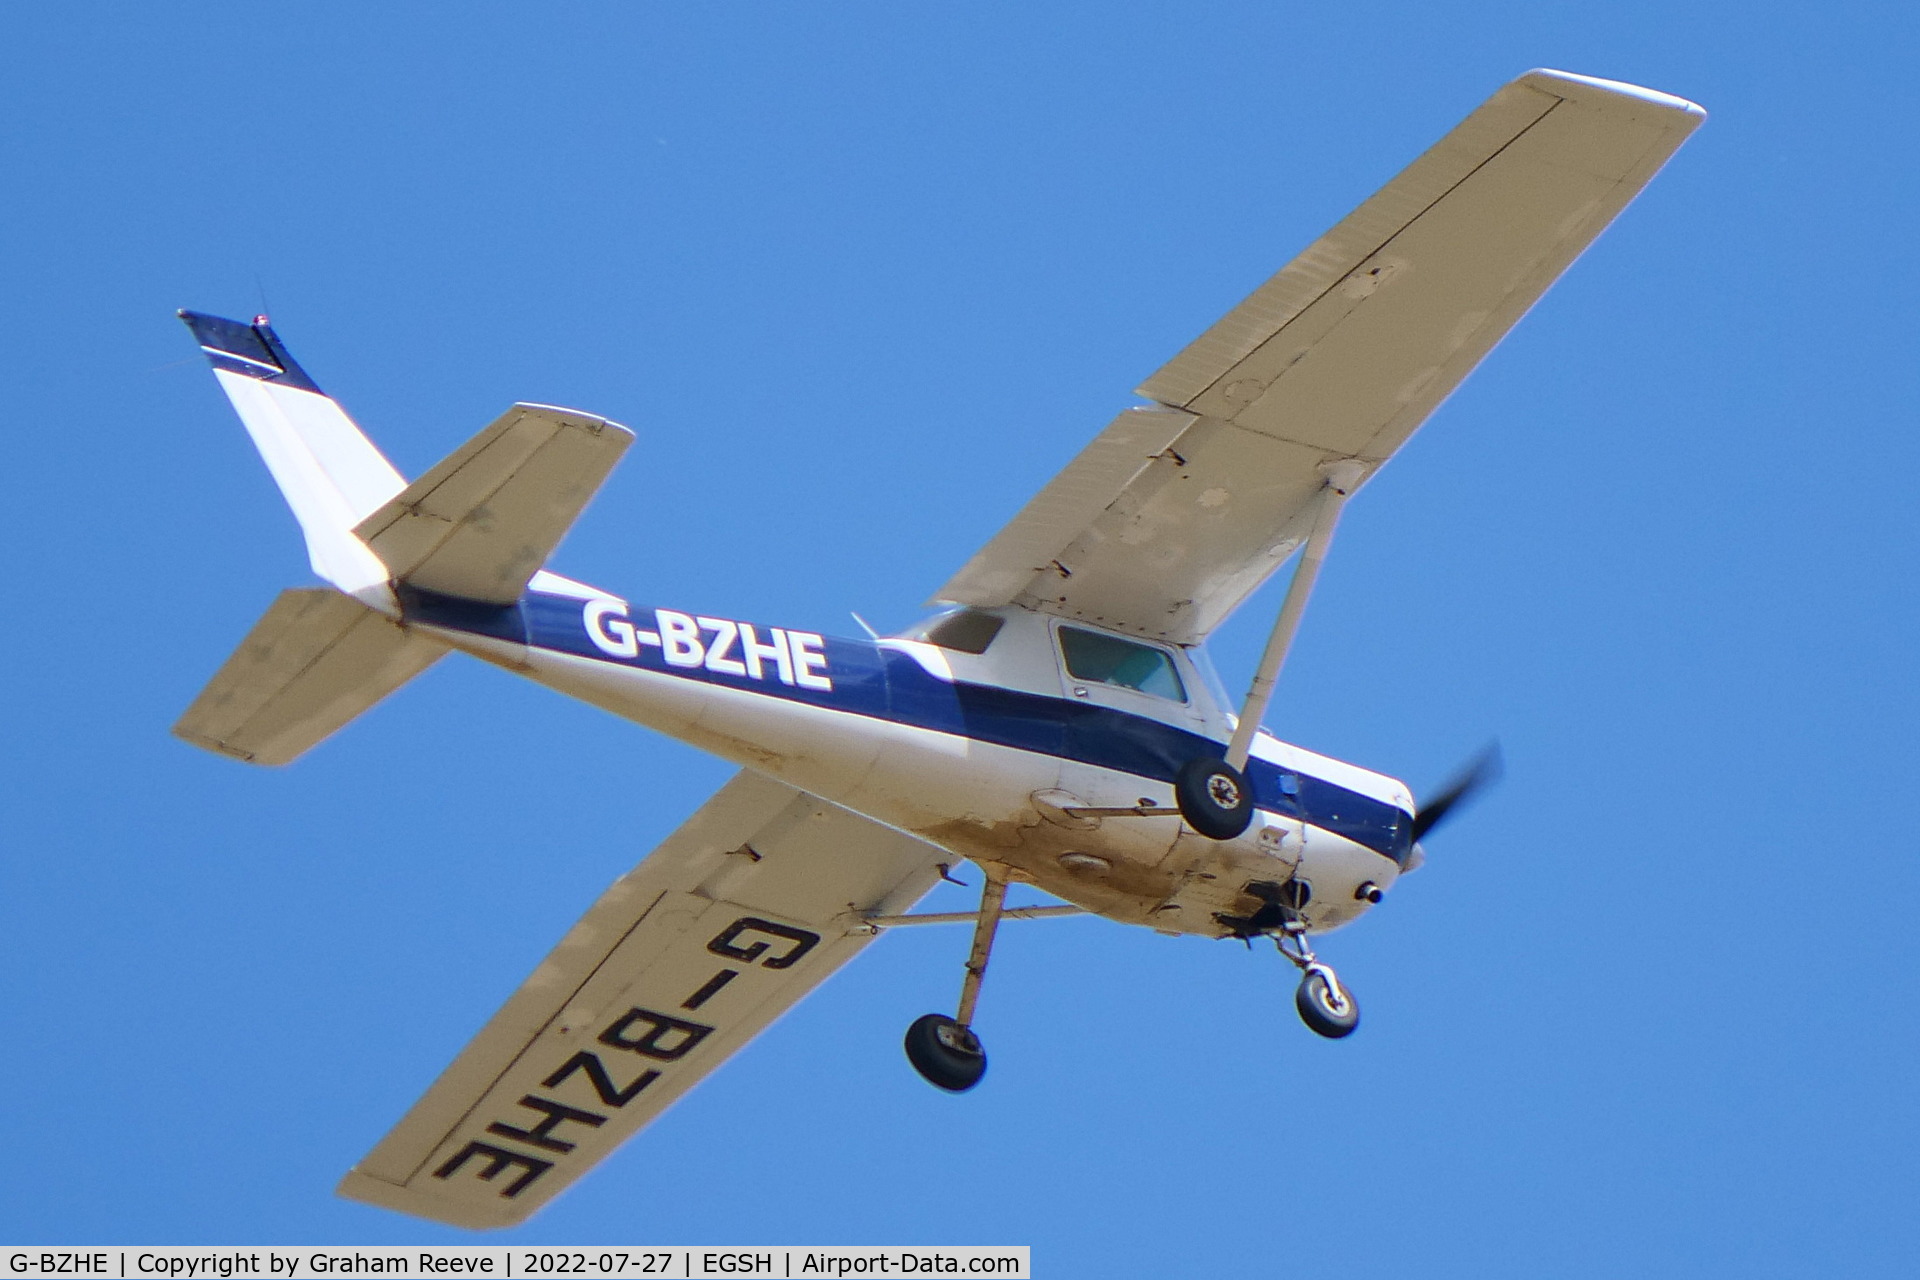 G-BZHE, 1978 Cessna 152 C/N 152-81303, Departing from Norwich.